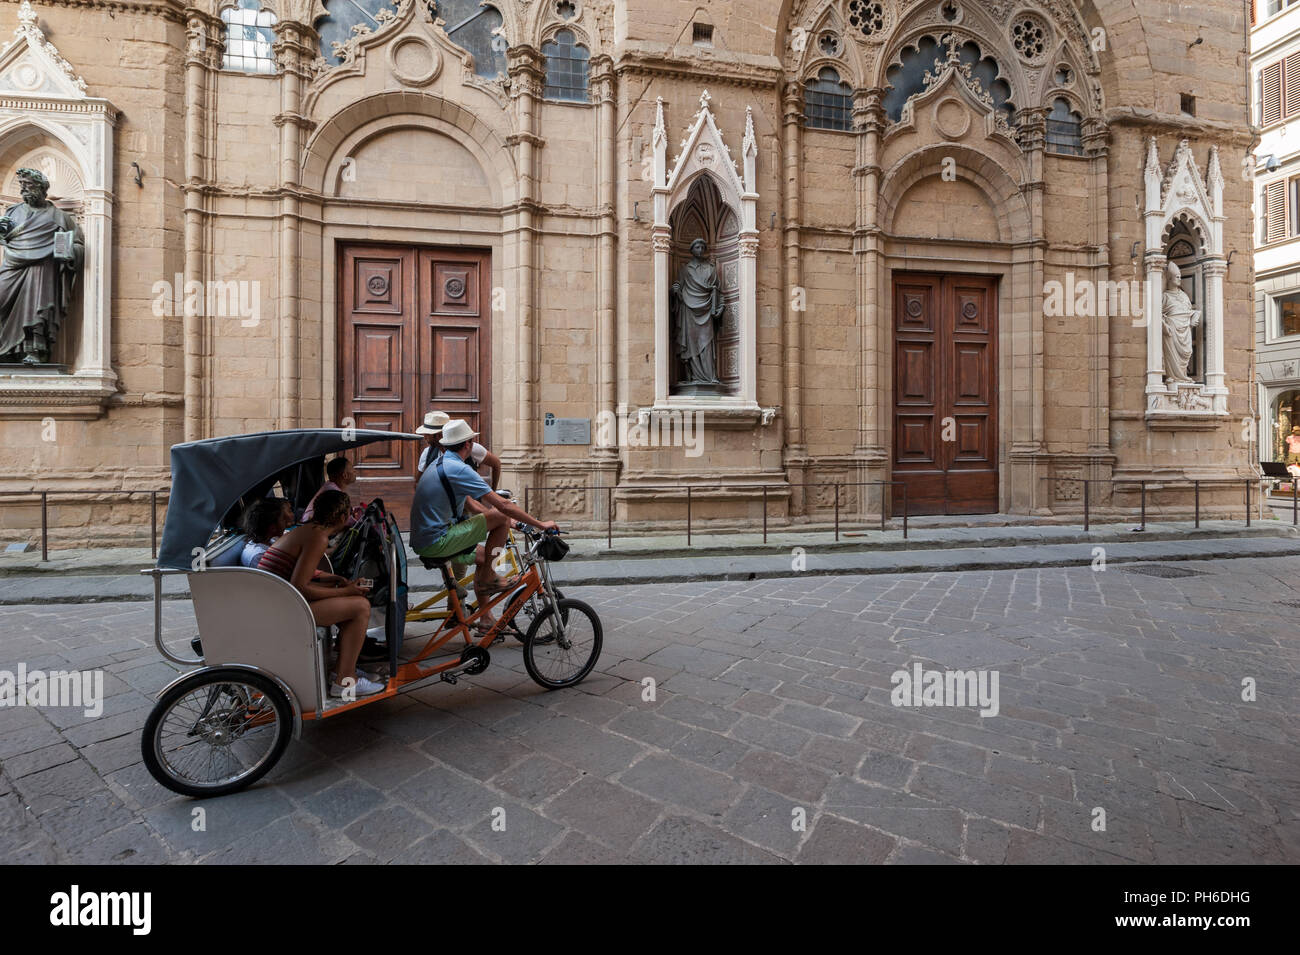 Florence, Italy - 2018, July 14: Tourists on a sightseeing tour, on pedicab, visiting Orsanmichele church, in the historic centre of Florence, Italy. Stock Photo